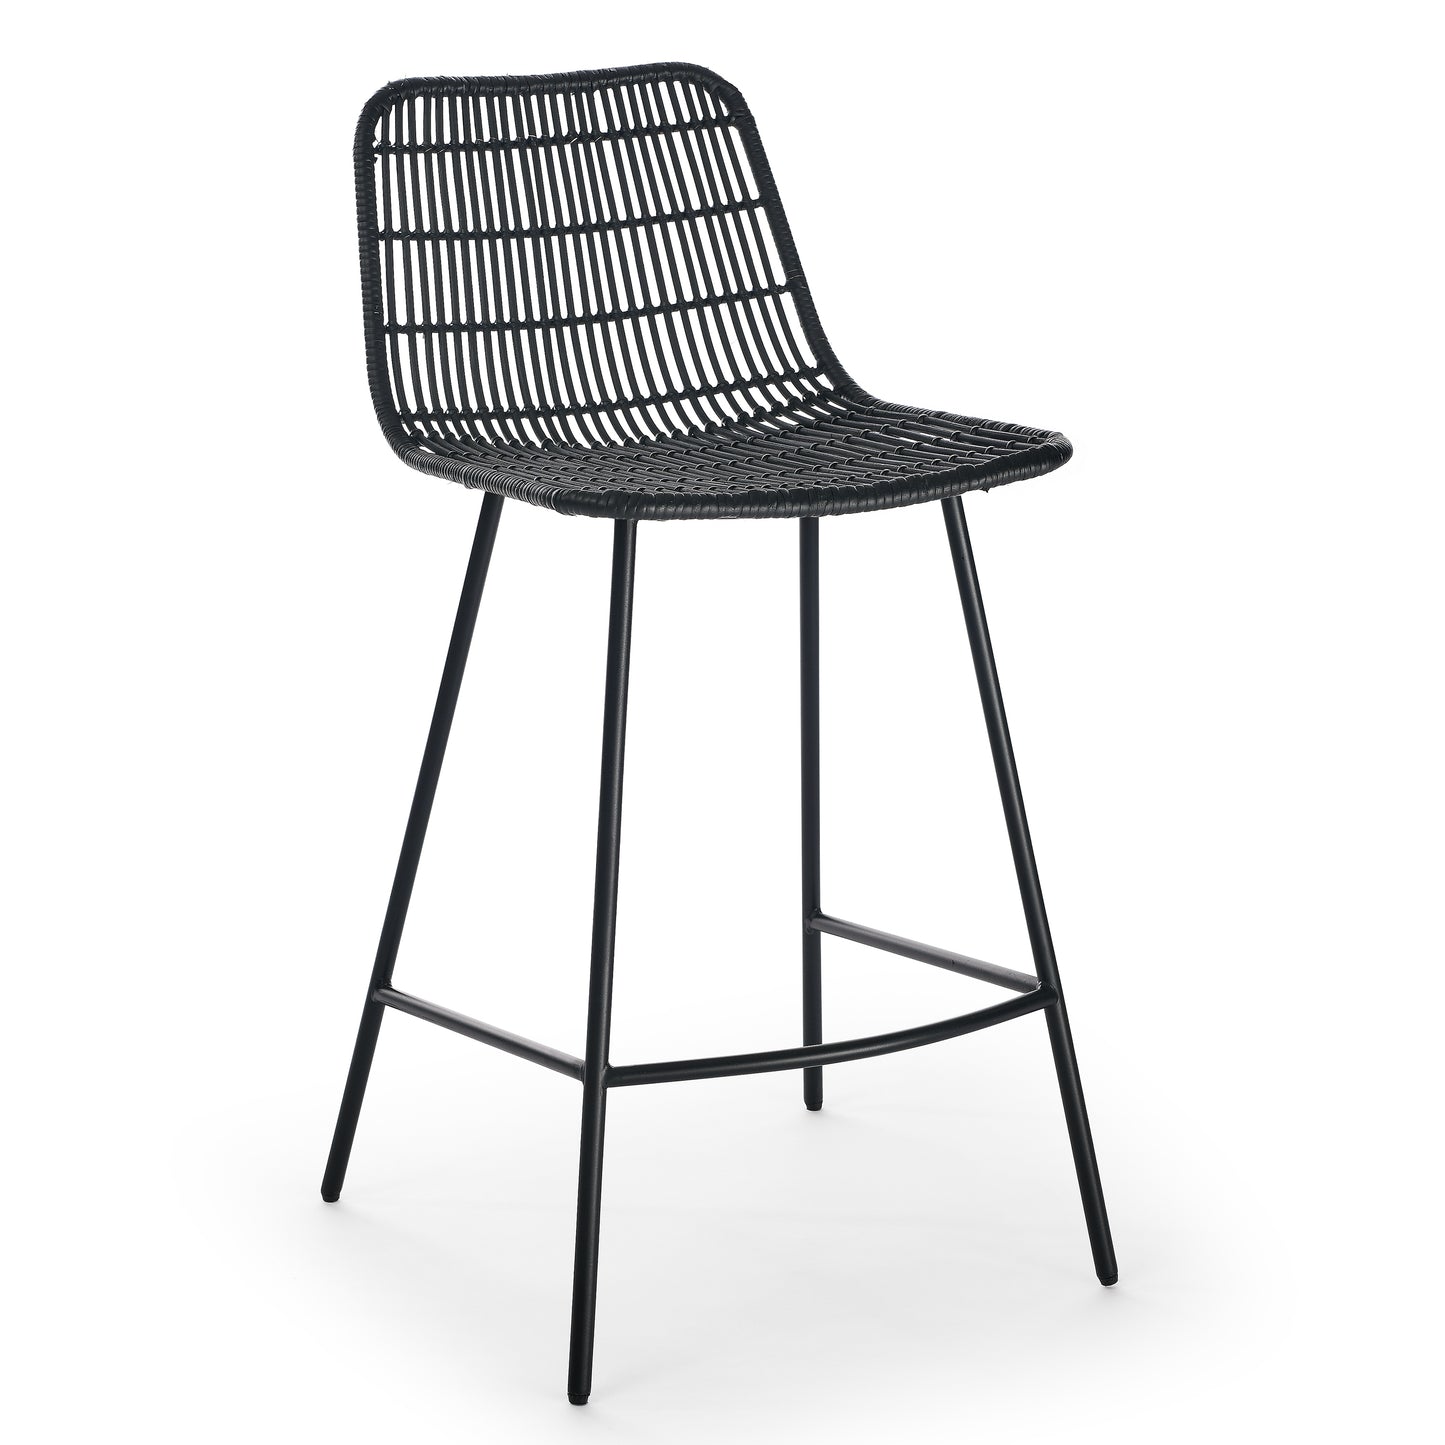 Black Rattan Counter High Chairs, Set of 2